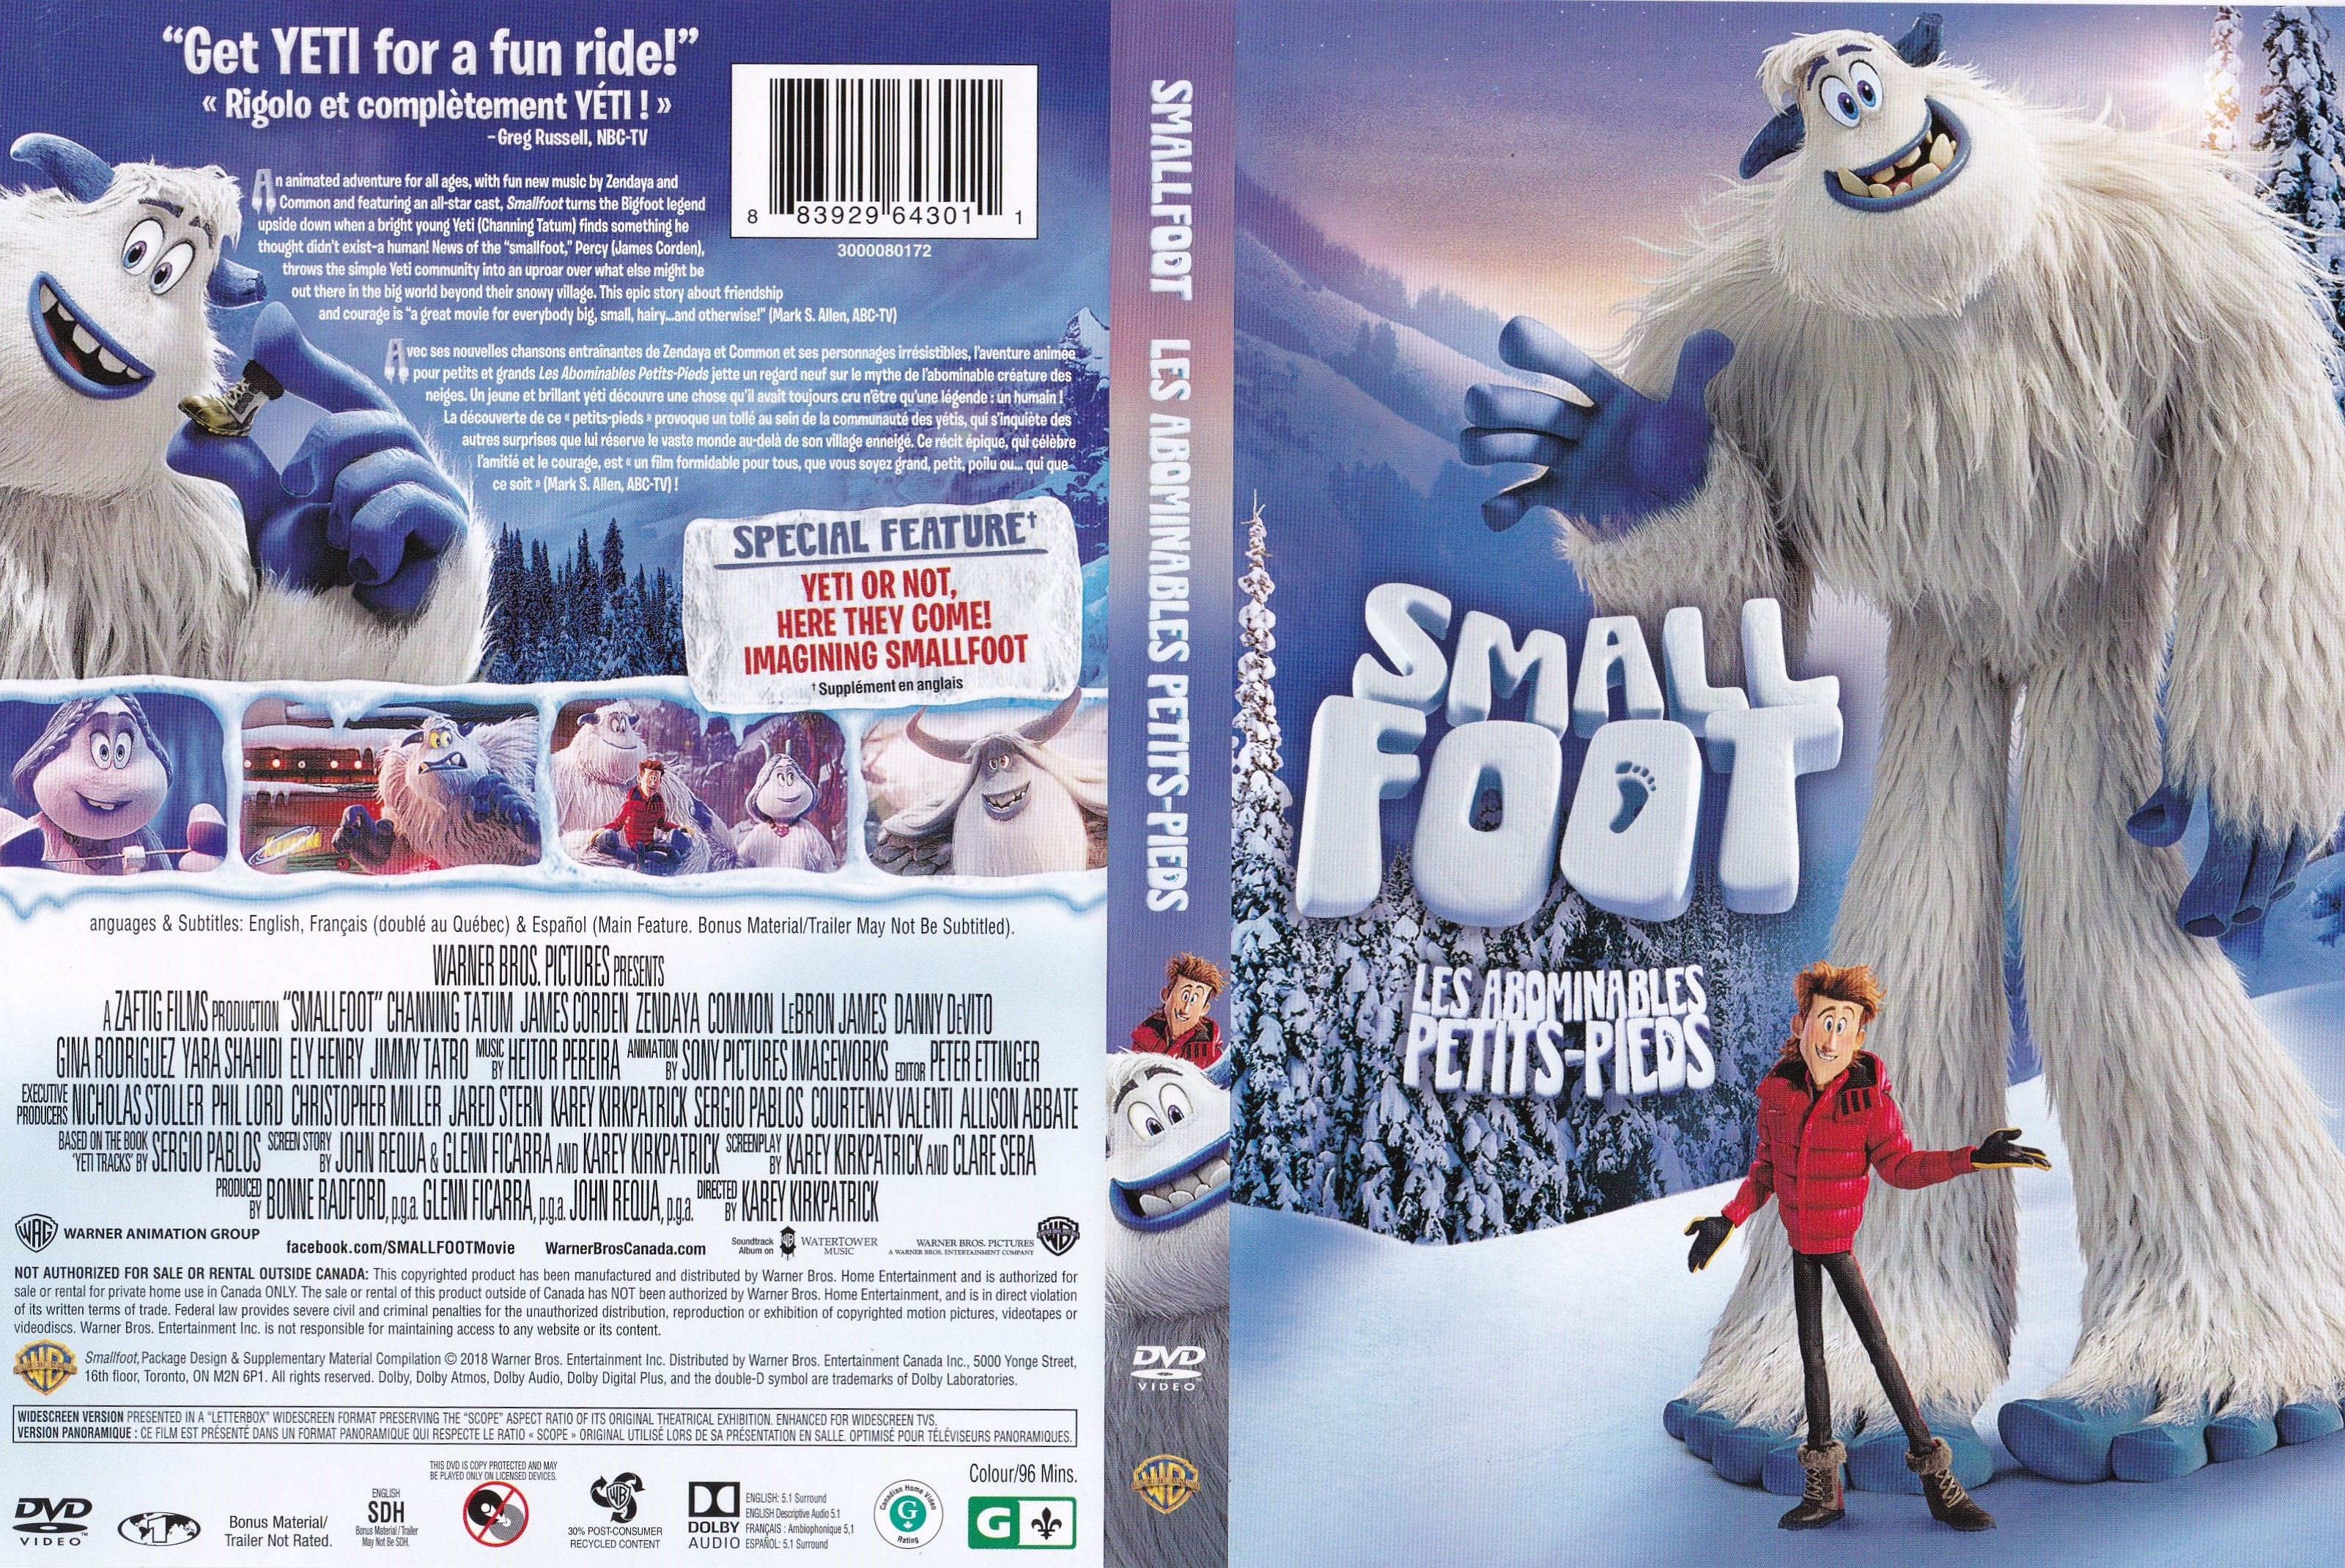 Jaquette DVD Les abominables petits-pieds - Small foot (canadienne)